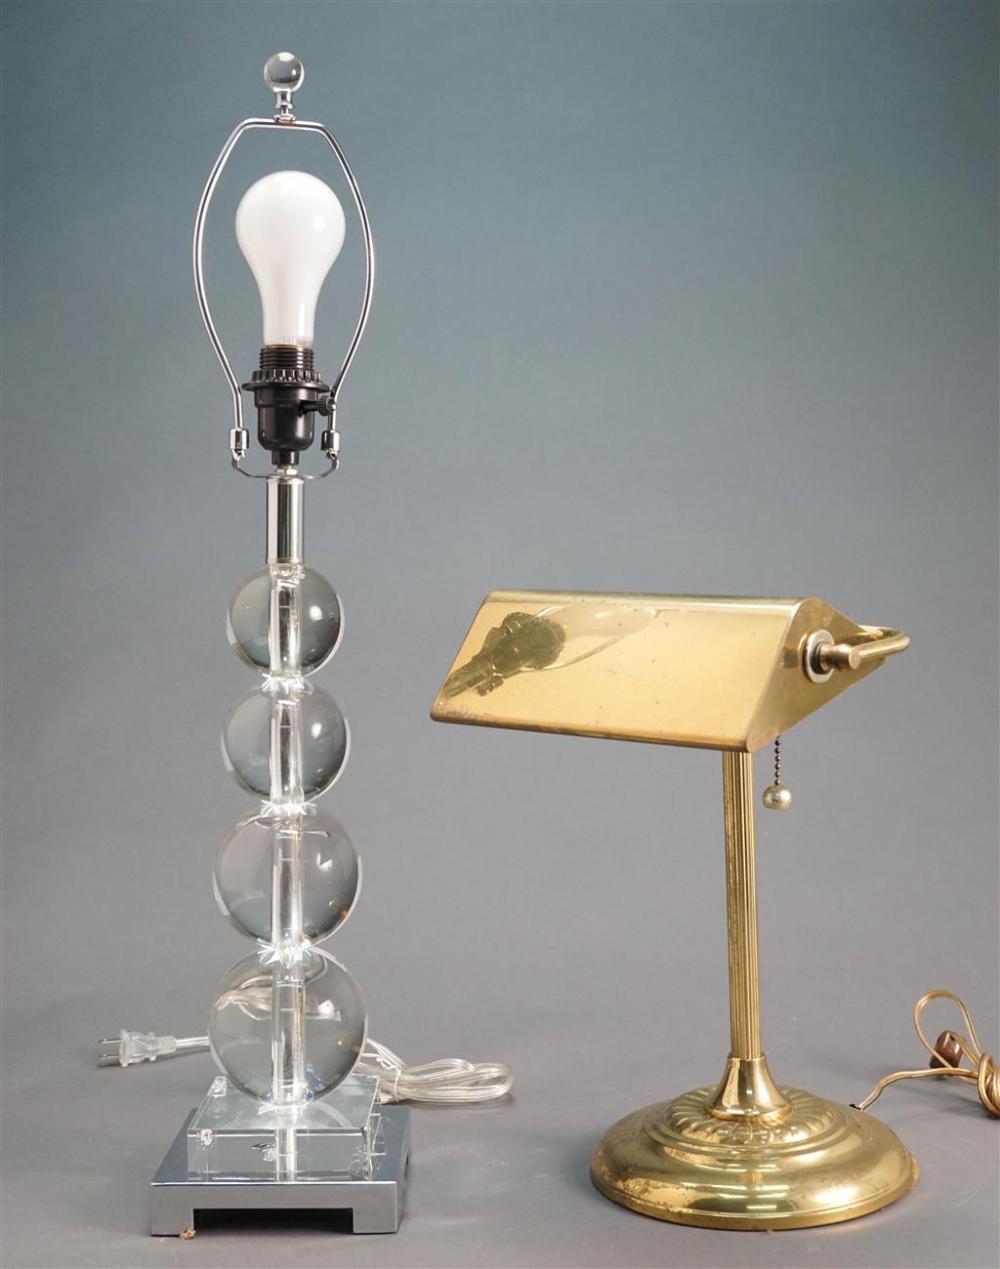 CONTEMPORARY ACRYLIC TABLE LAMP 3280bc